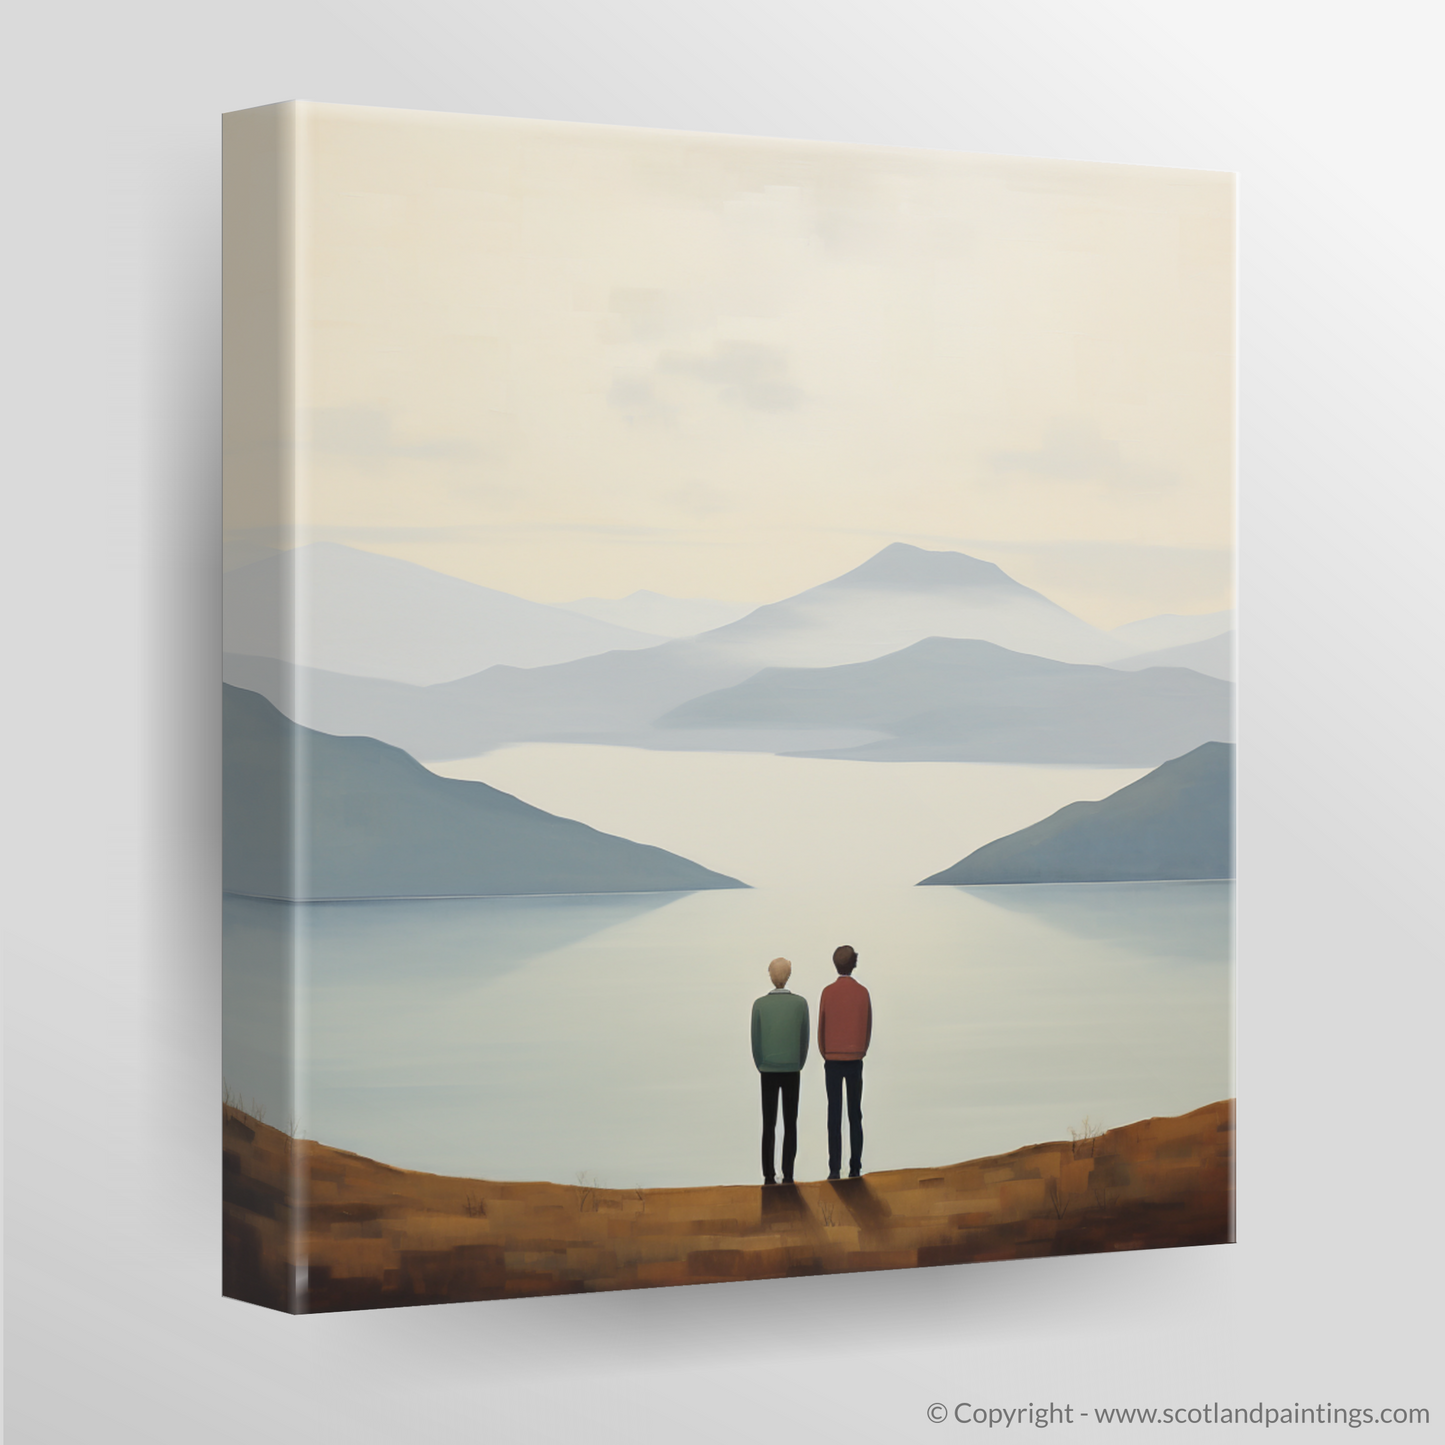 Painting and Art Print of Two hikers looking out on Loch Lomond. Hikers' Repose at Loch Lomond: A Minimalist Homage.